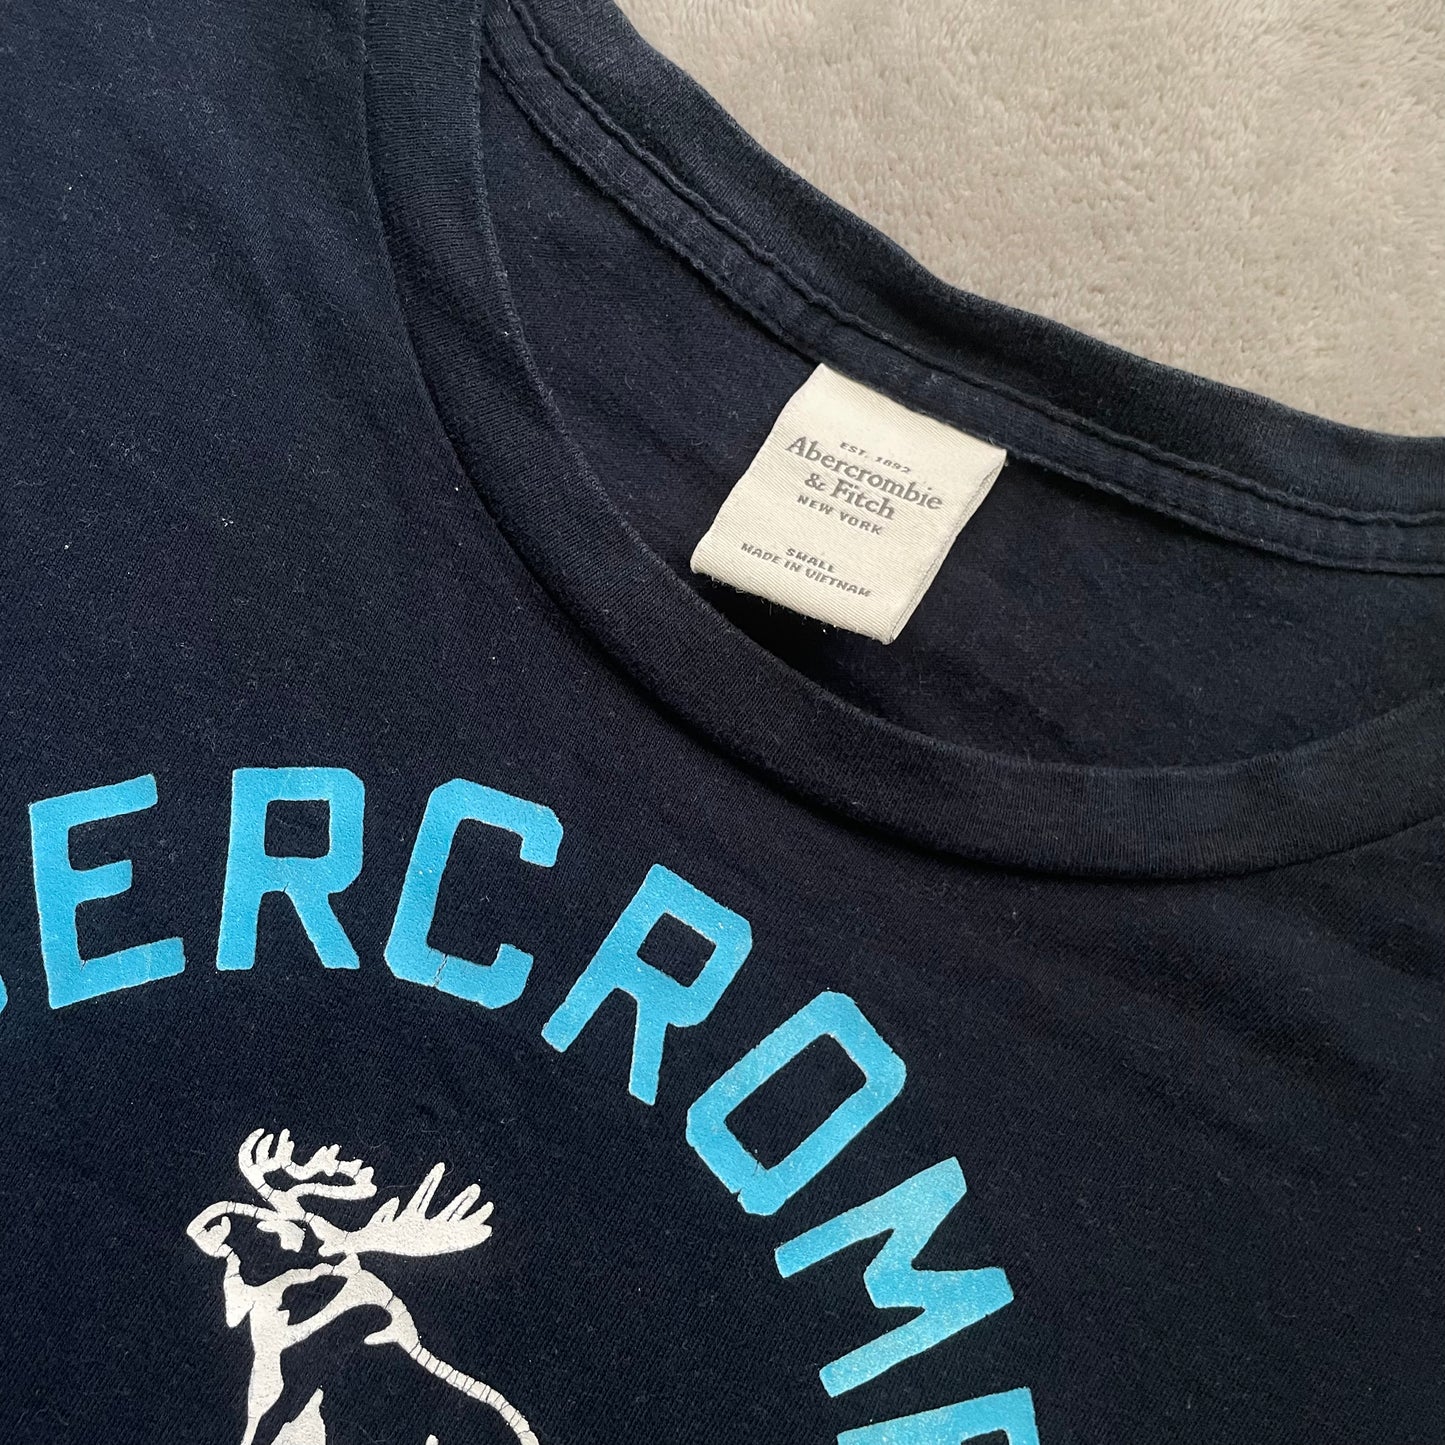 Abercrombie and Fitch graphic tee